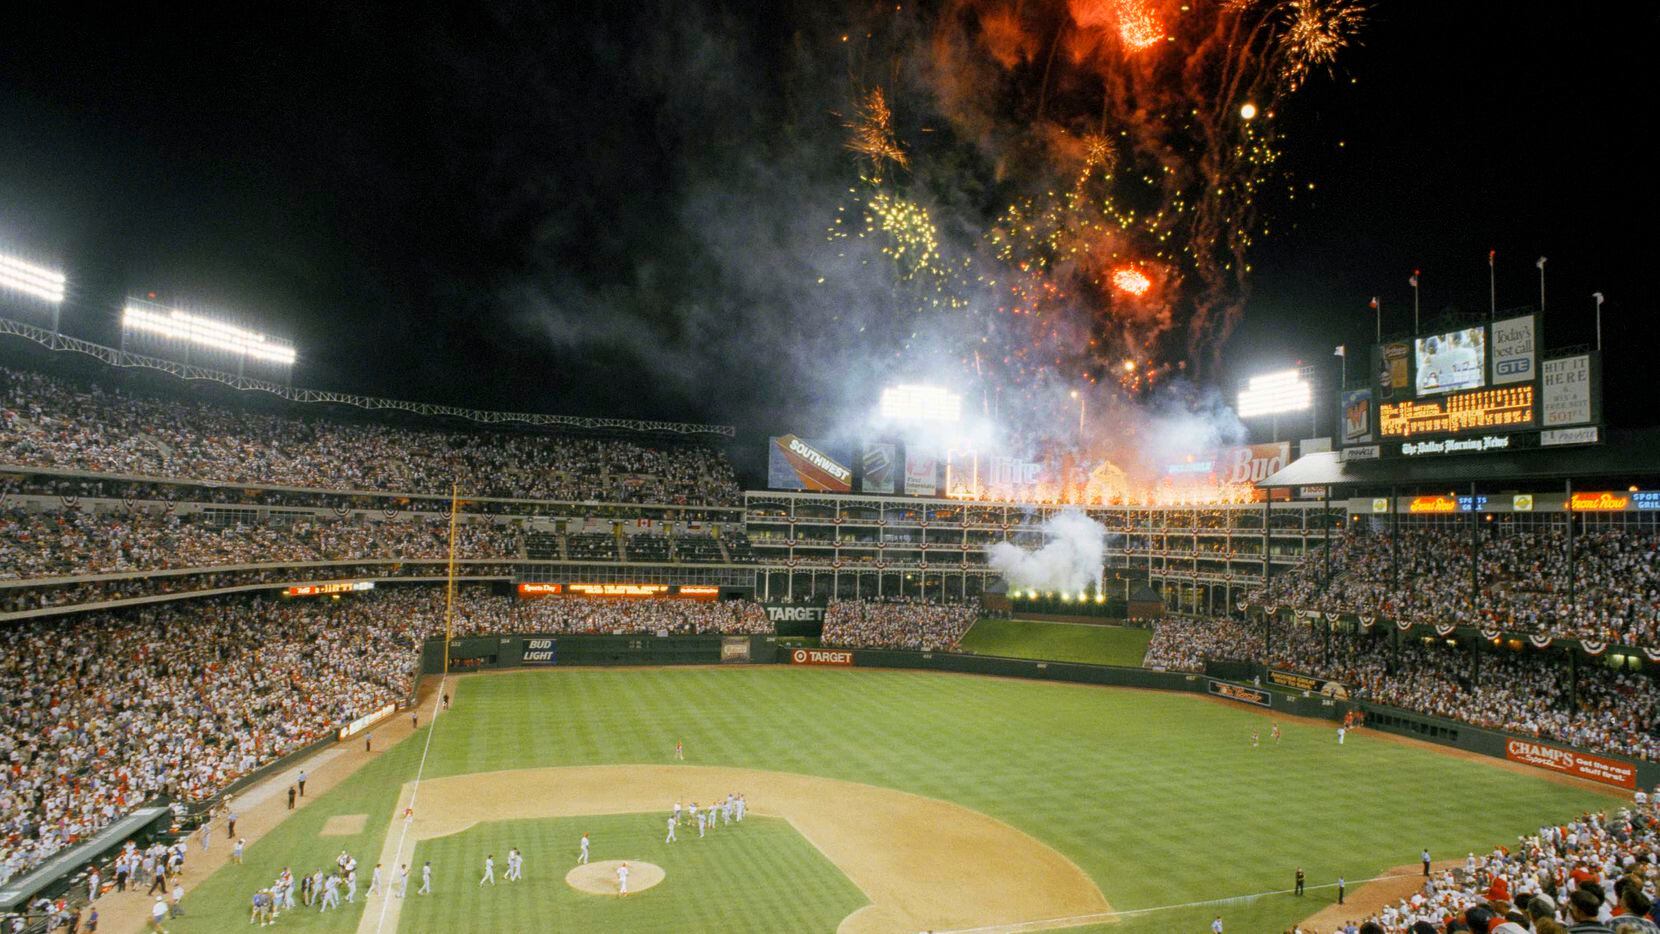 The National League celebrates with fireworks following Tuesday night's All Star game at The Ballpark in Arlington, July, 11, 1995. The National League defeated the American League 3-2 in nine innings.